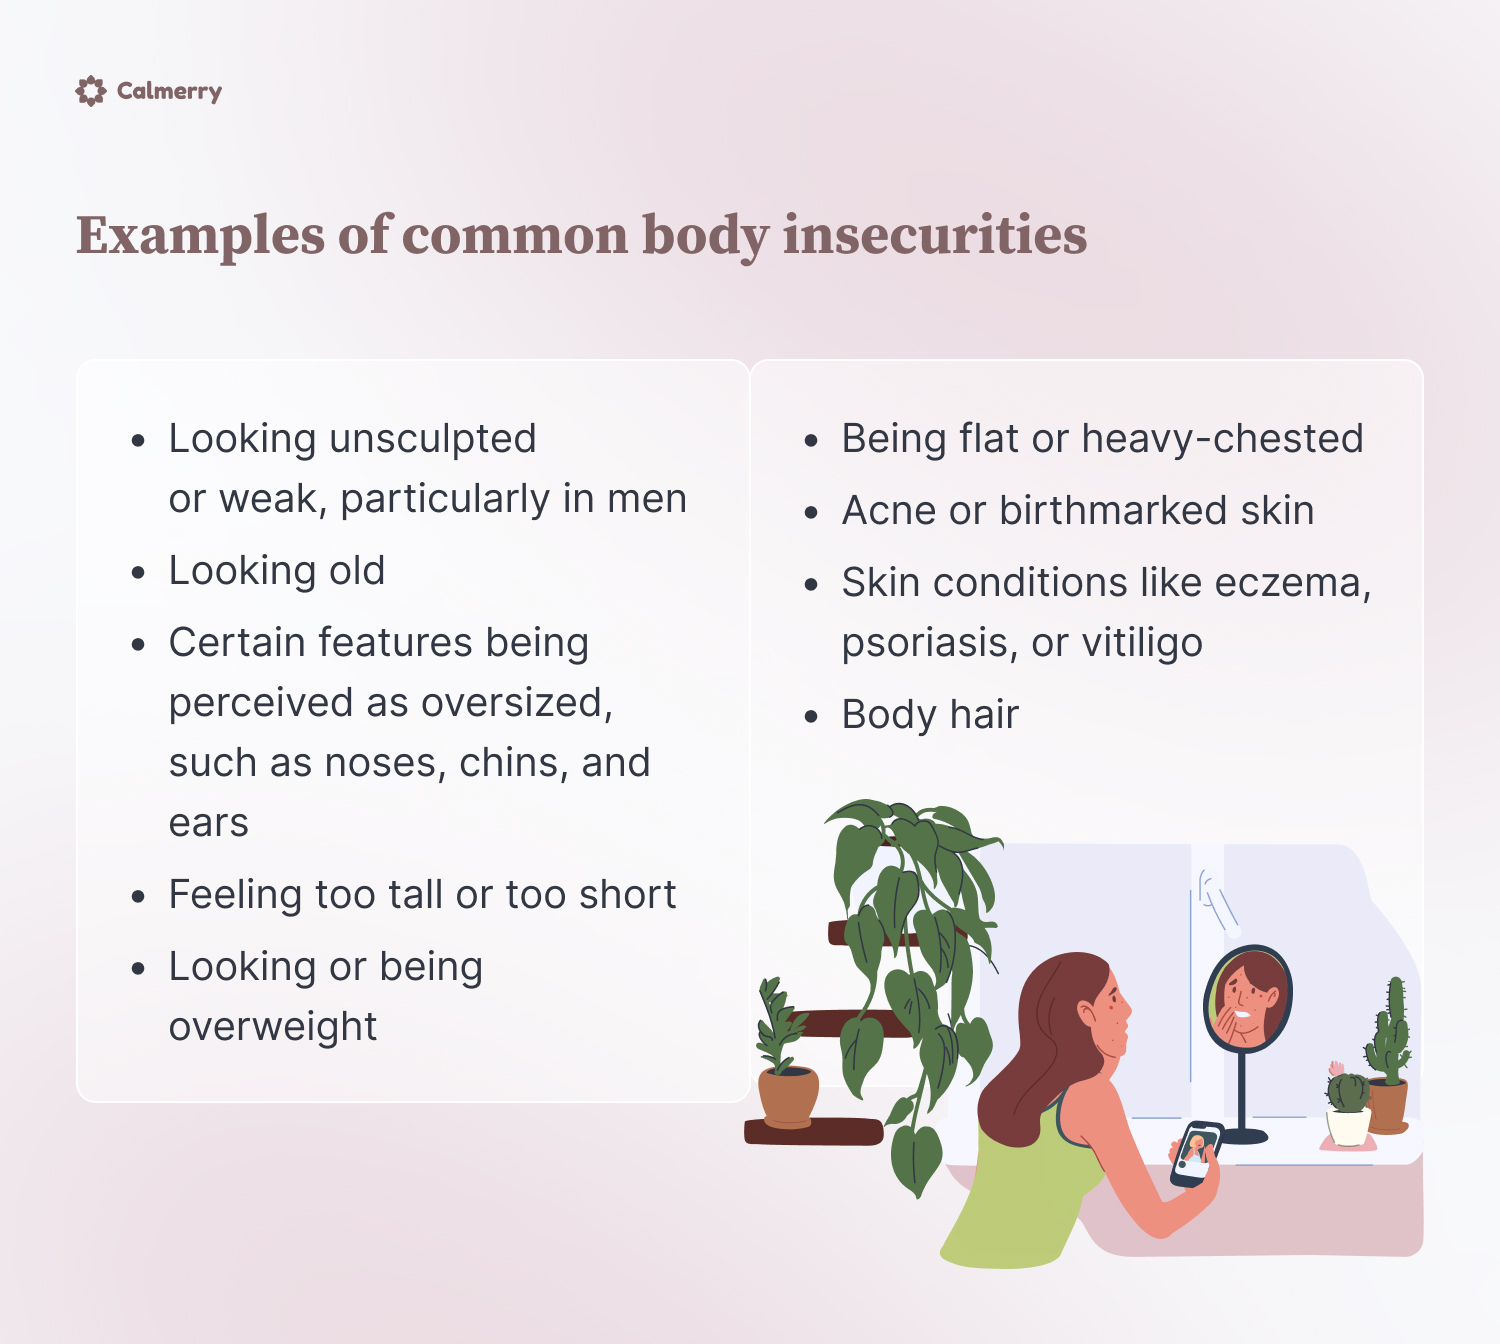 Examples of common body insecurities
Looking or being overweight
Looking unsculpted or weak, particularly in men
Looking old
Certain features being perceived as oversized, such as noses, chins, and ears
Being flat or heavy-chested
Acne or birthmarked skin
Skin conditions like eczema, psoriasis, or vitiligo
Feeling too tall or too short
Body hair